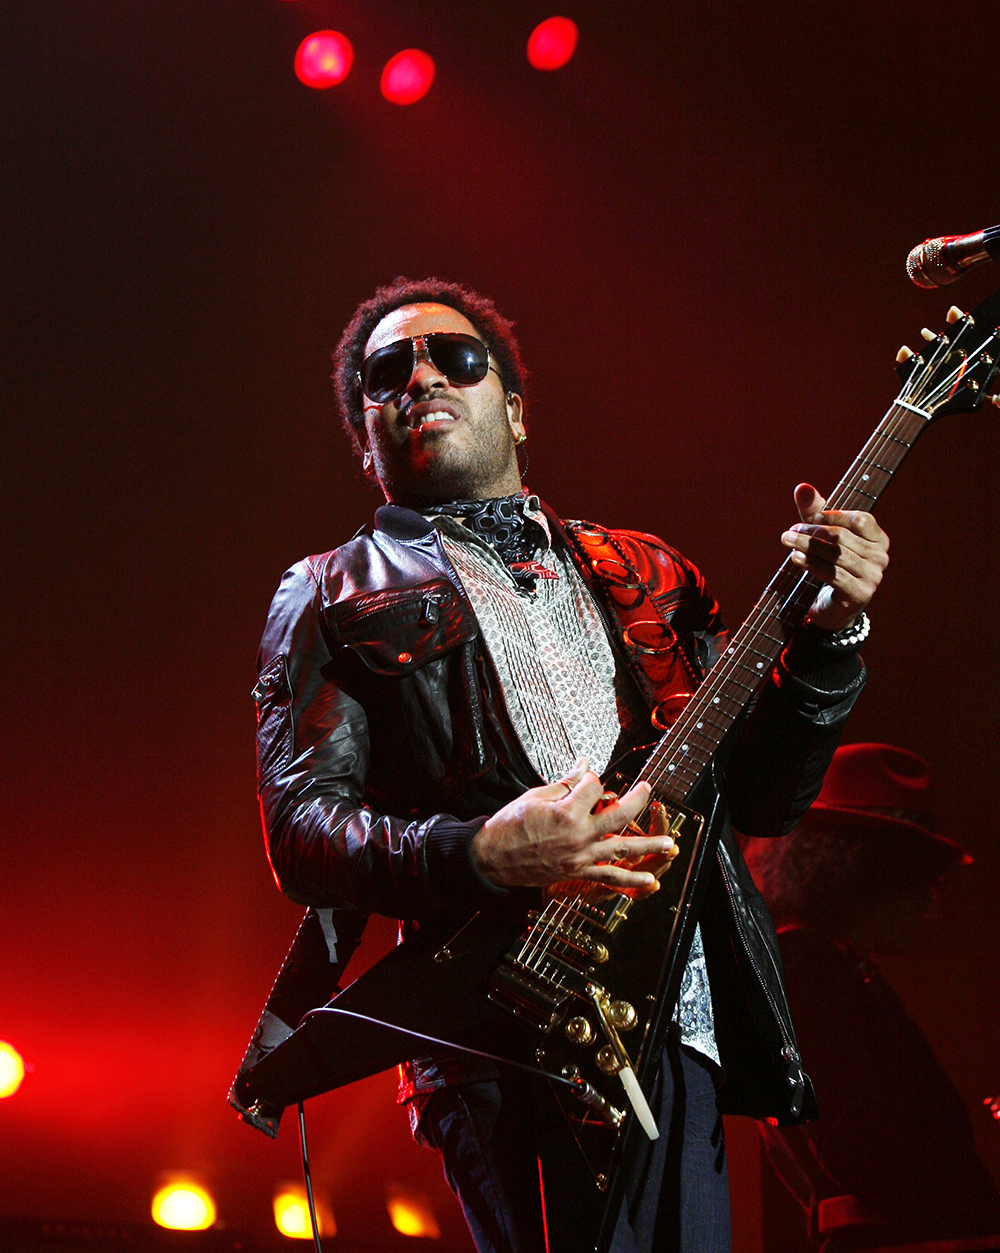 <p>Lenny Kravitz performs in concert at Le Zenith in Paris on July 2, 2008. He was touring through Europe.</p>